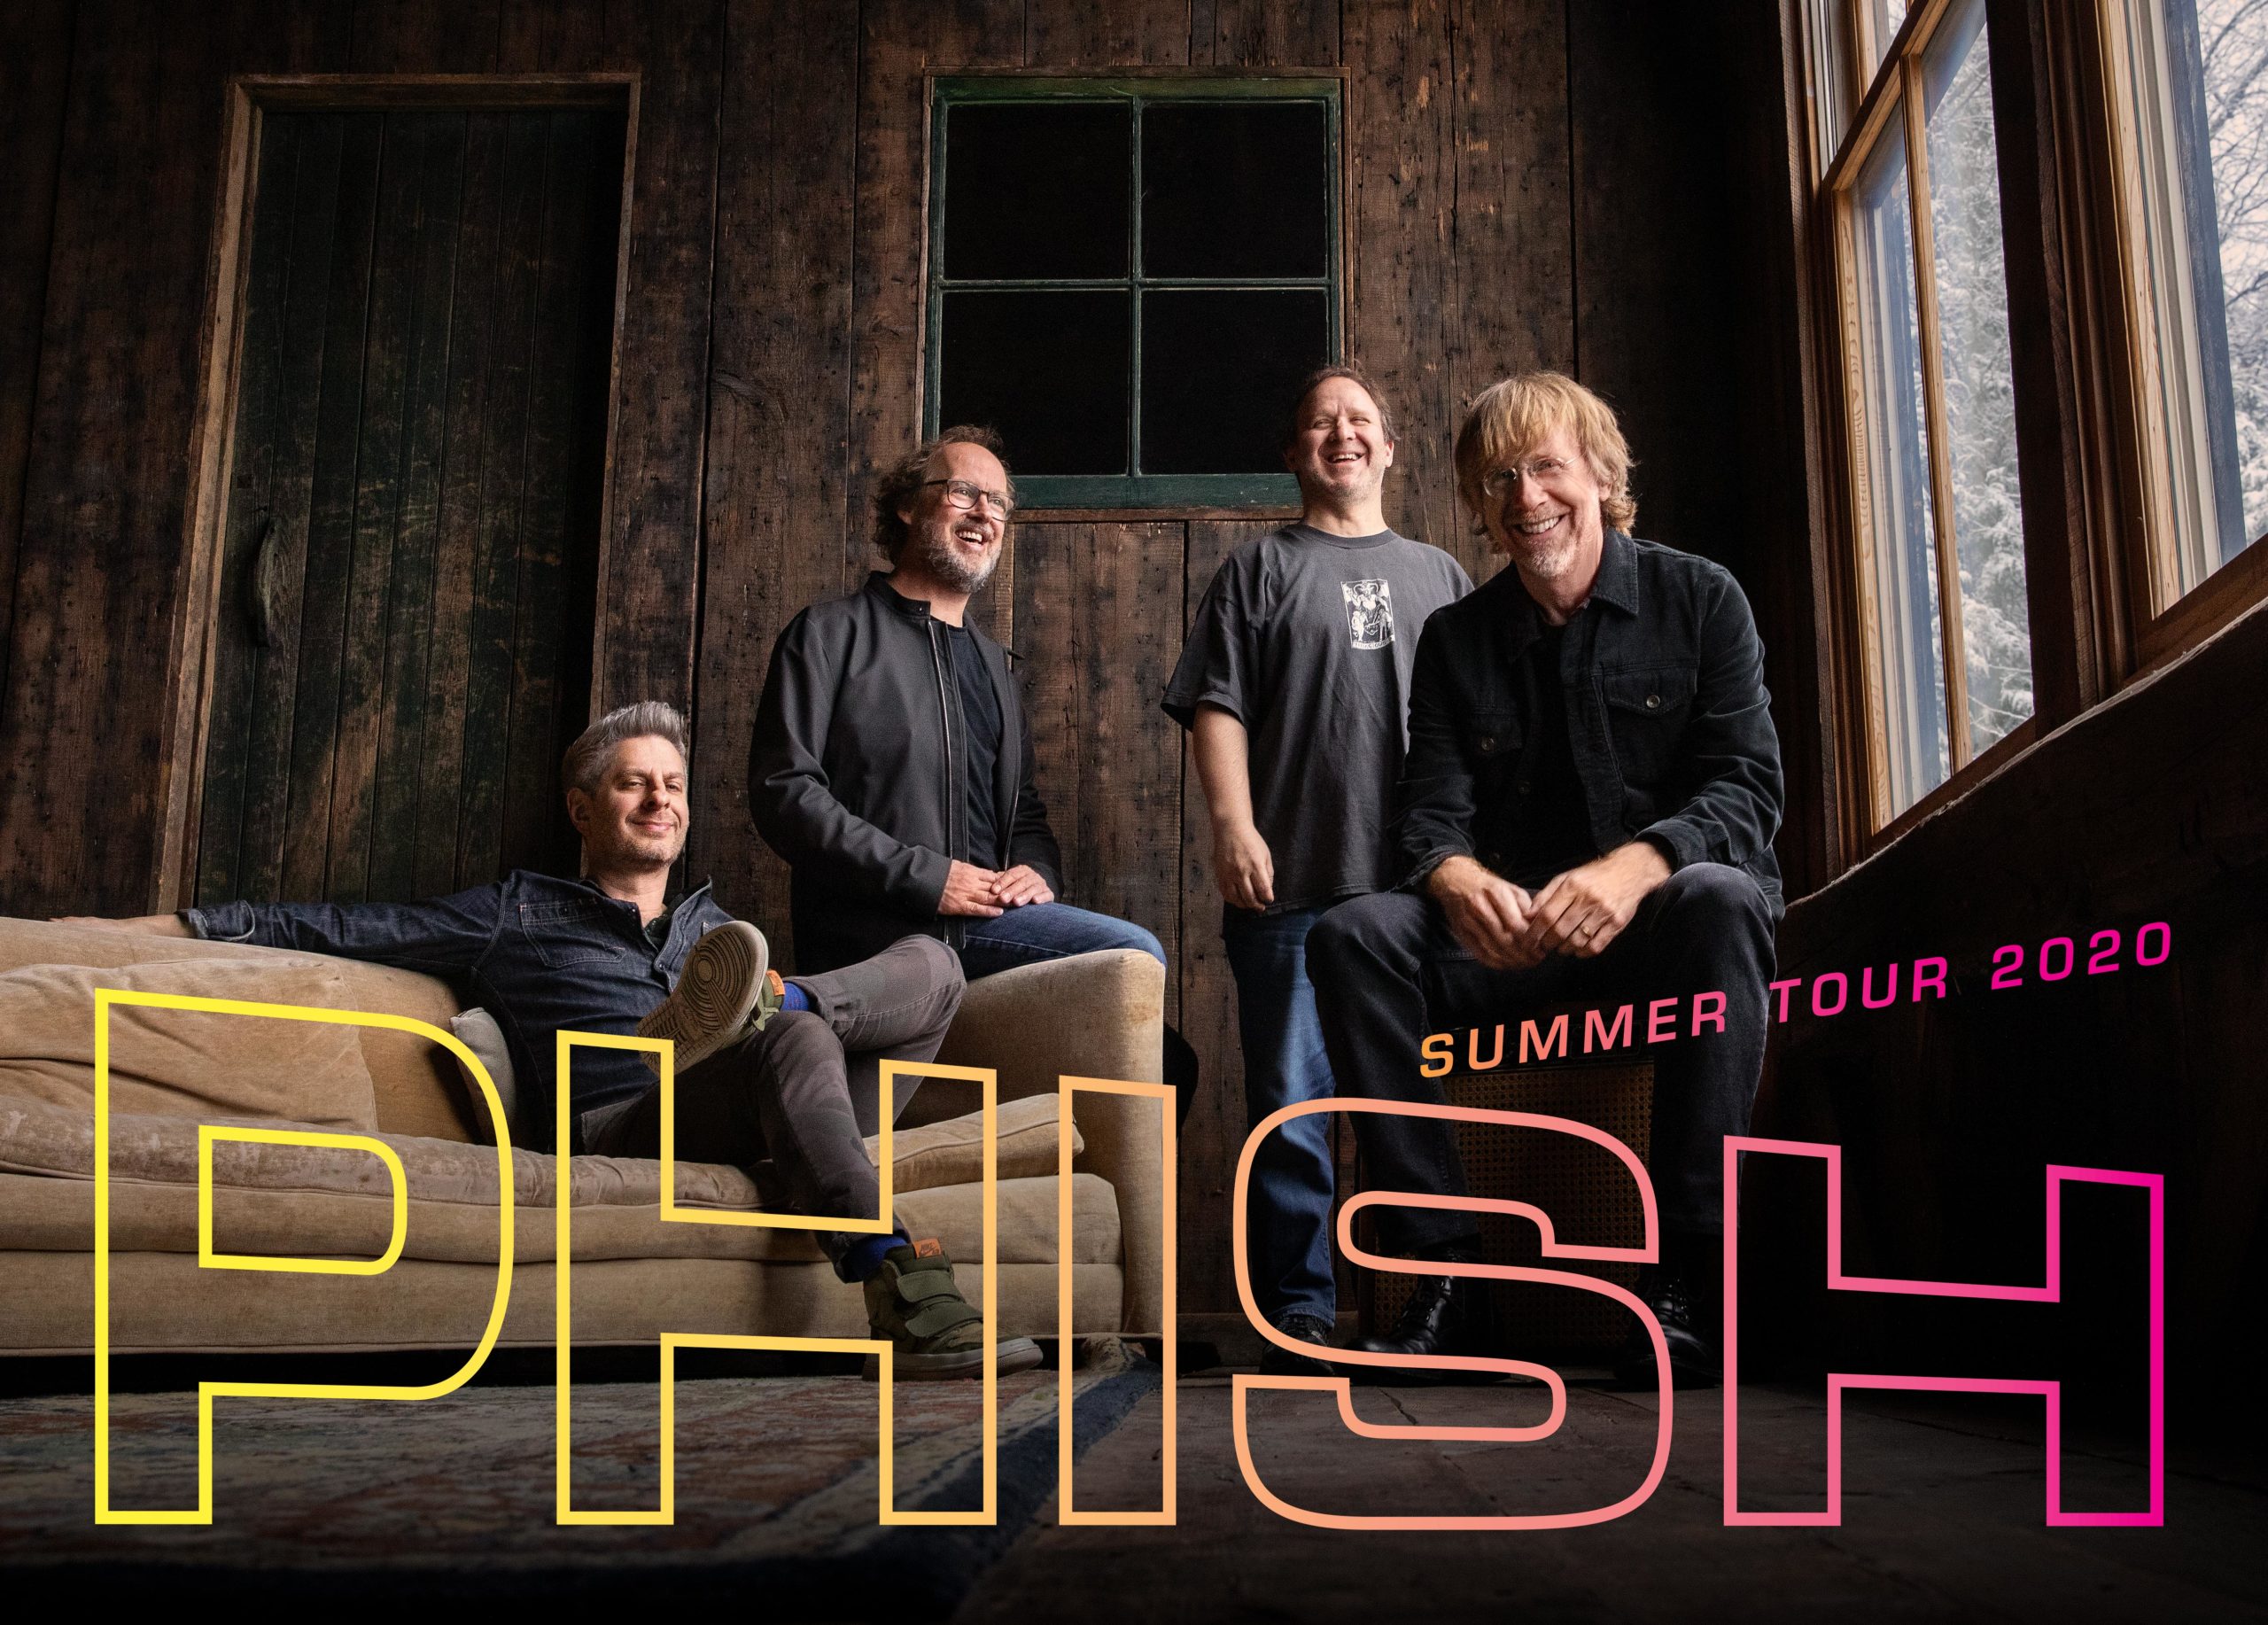 Phish [CANCELLED] at Giant Center